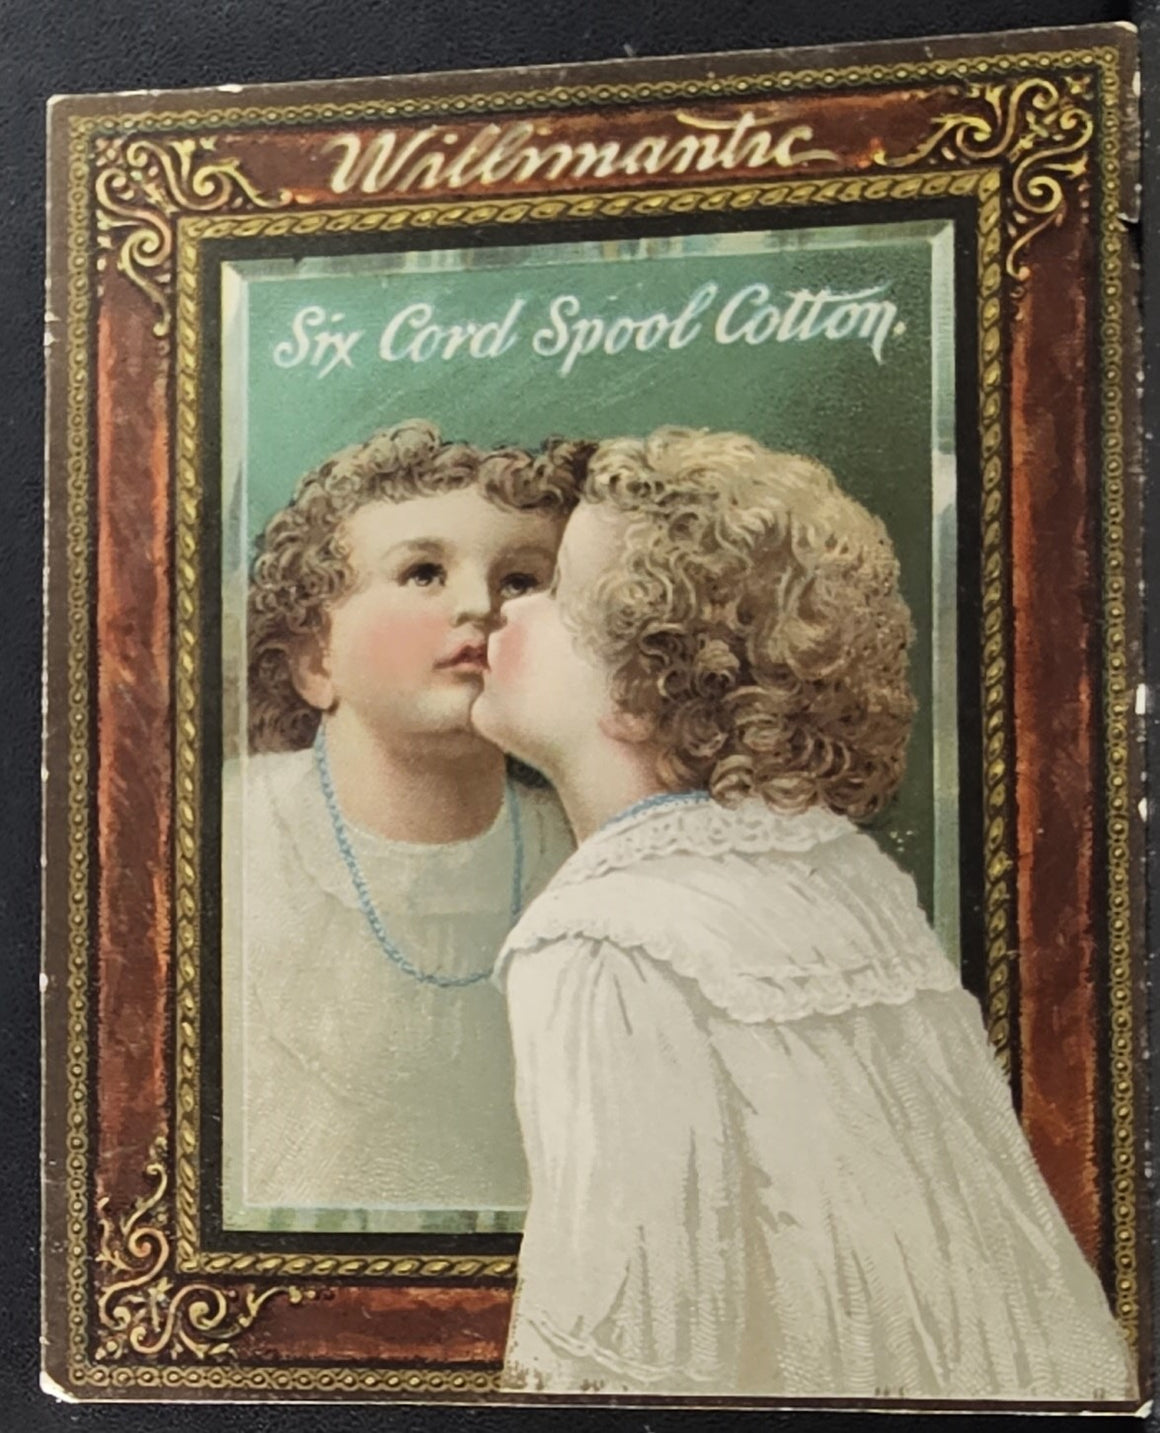 Antique Advertising Trade Card Six Cord Spool Cotton Girl in Mirror Willimantic The Best Thread